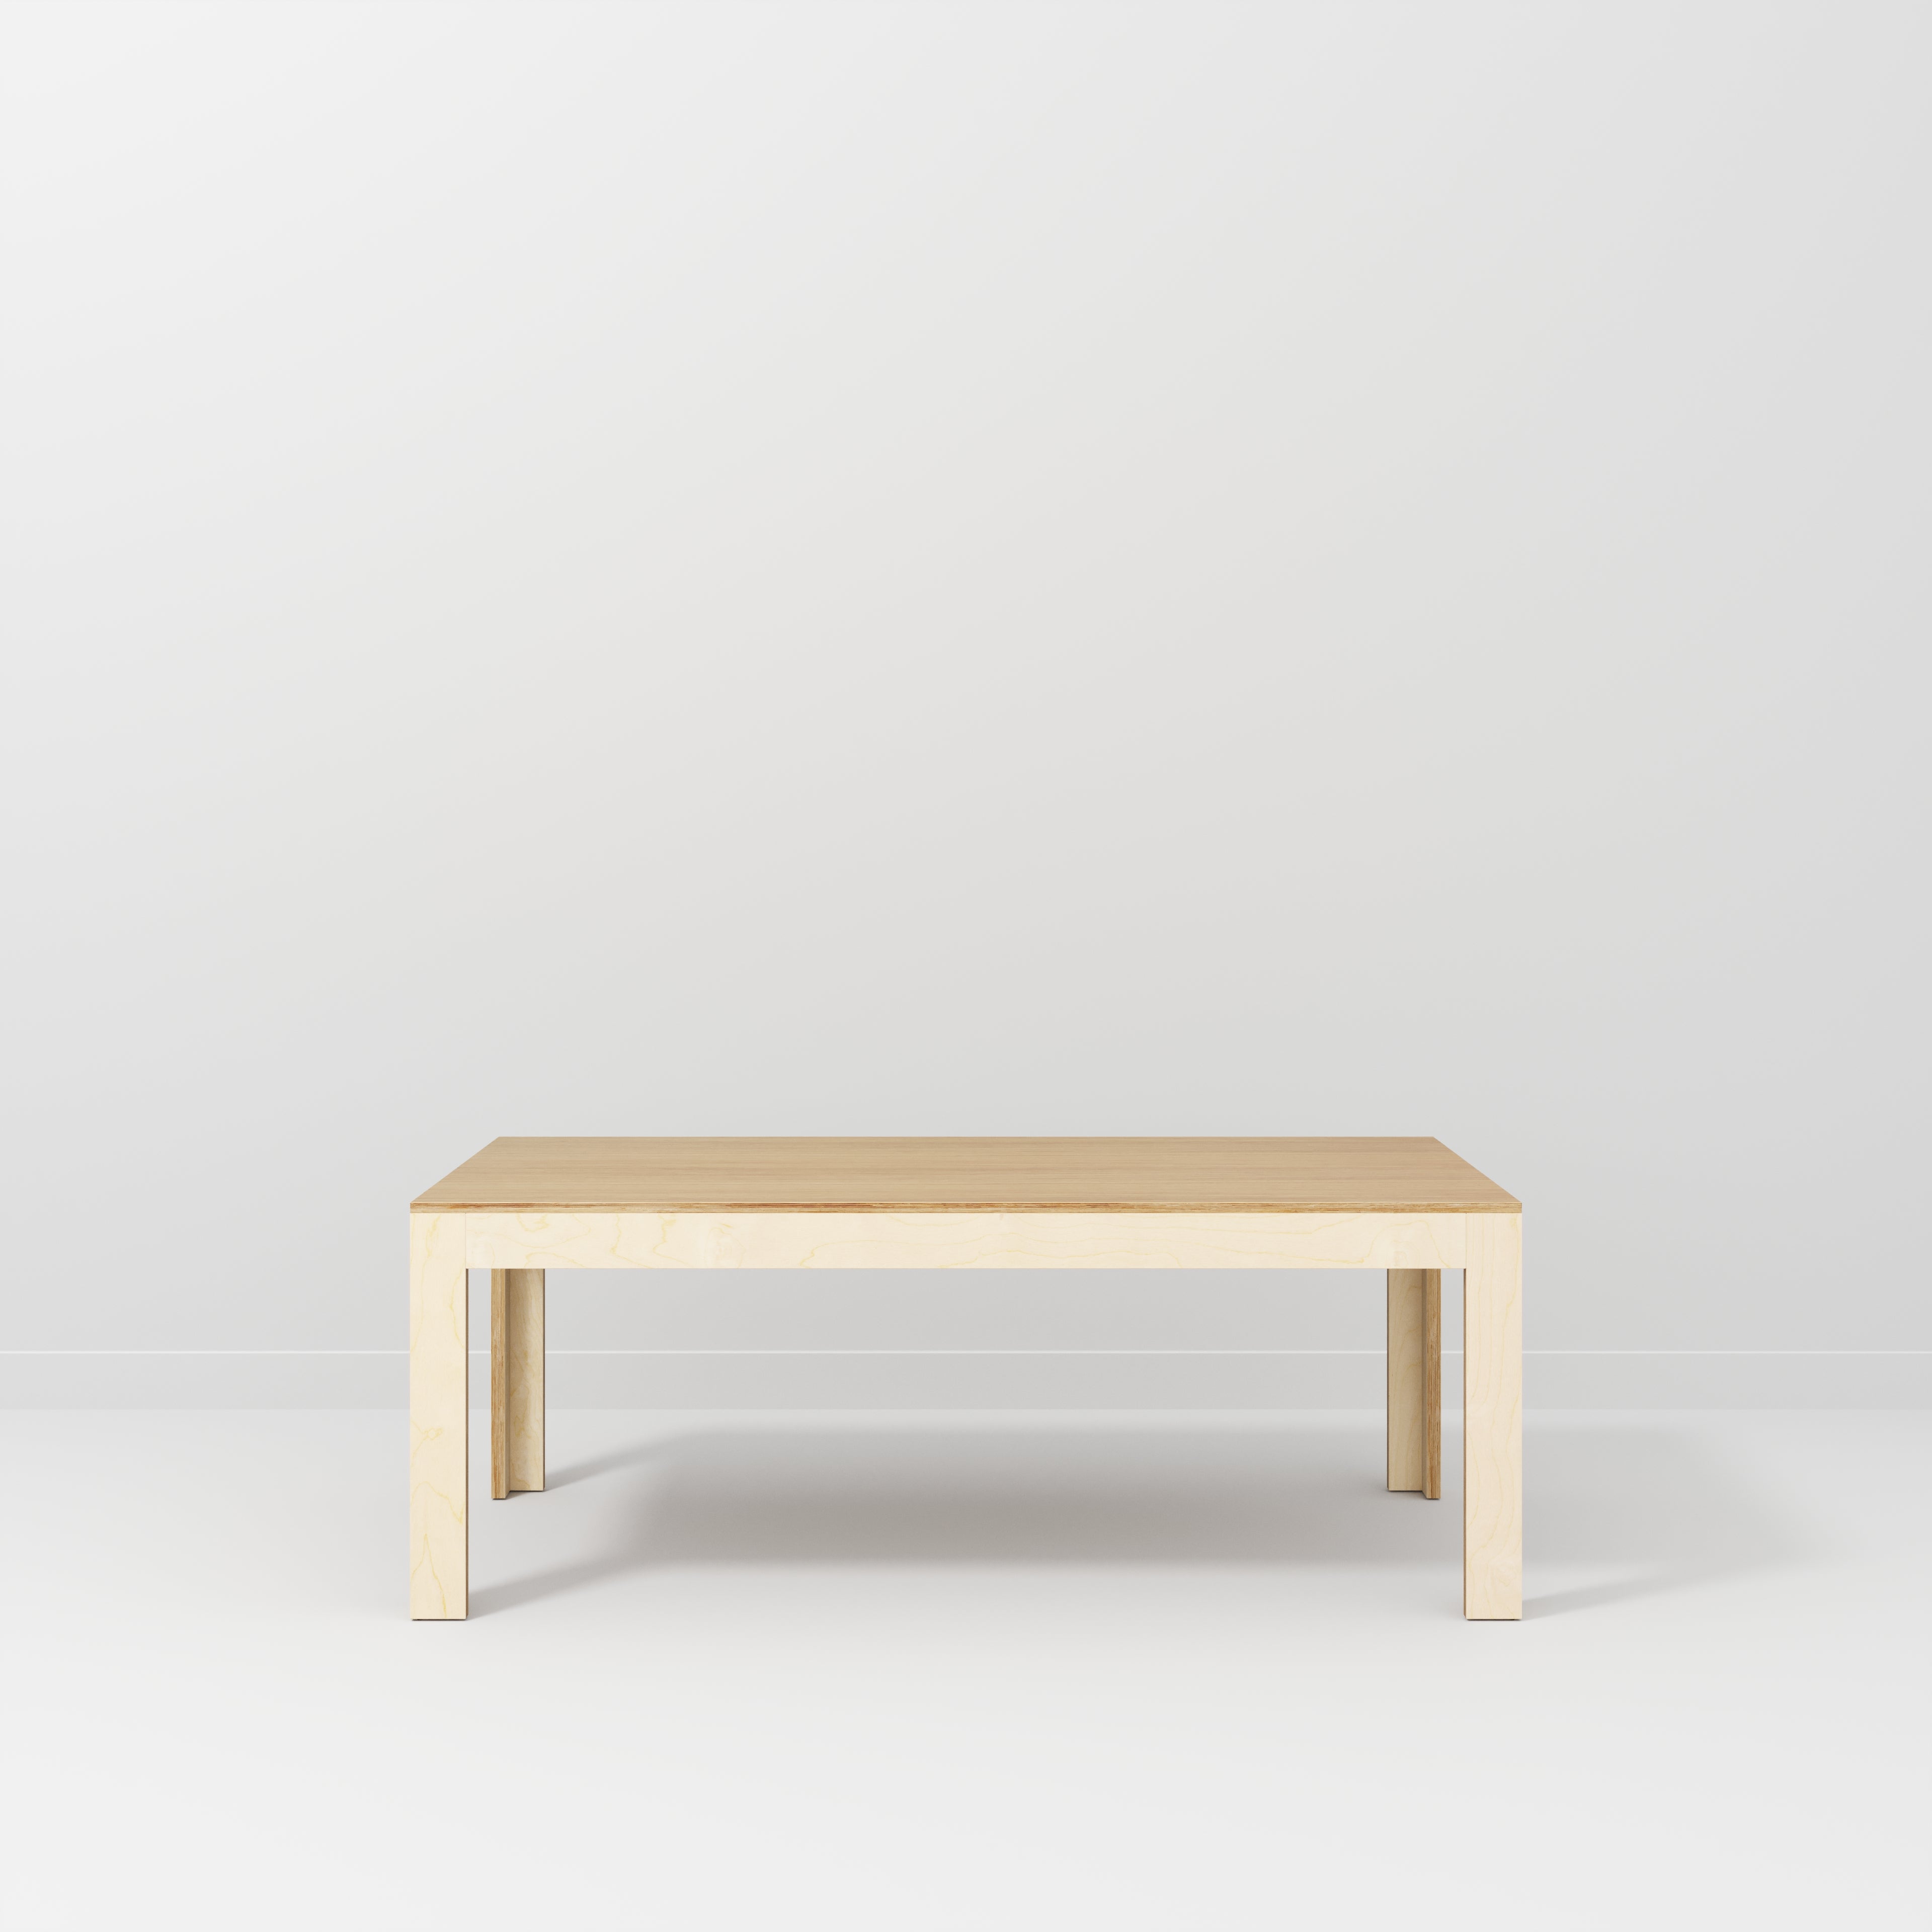 Table with Solid Frame - Plywood Oak - 2000(w) x 1000(d) x 750(h) x 750(h)